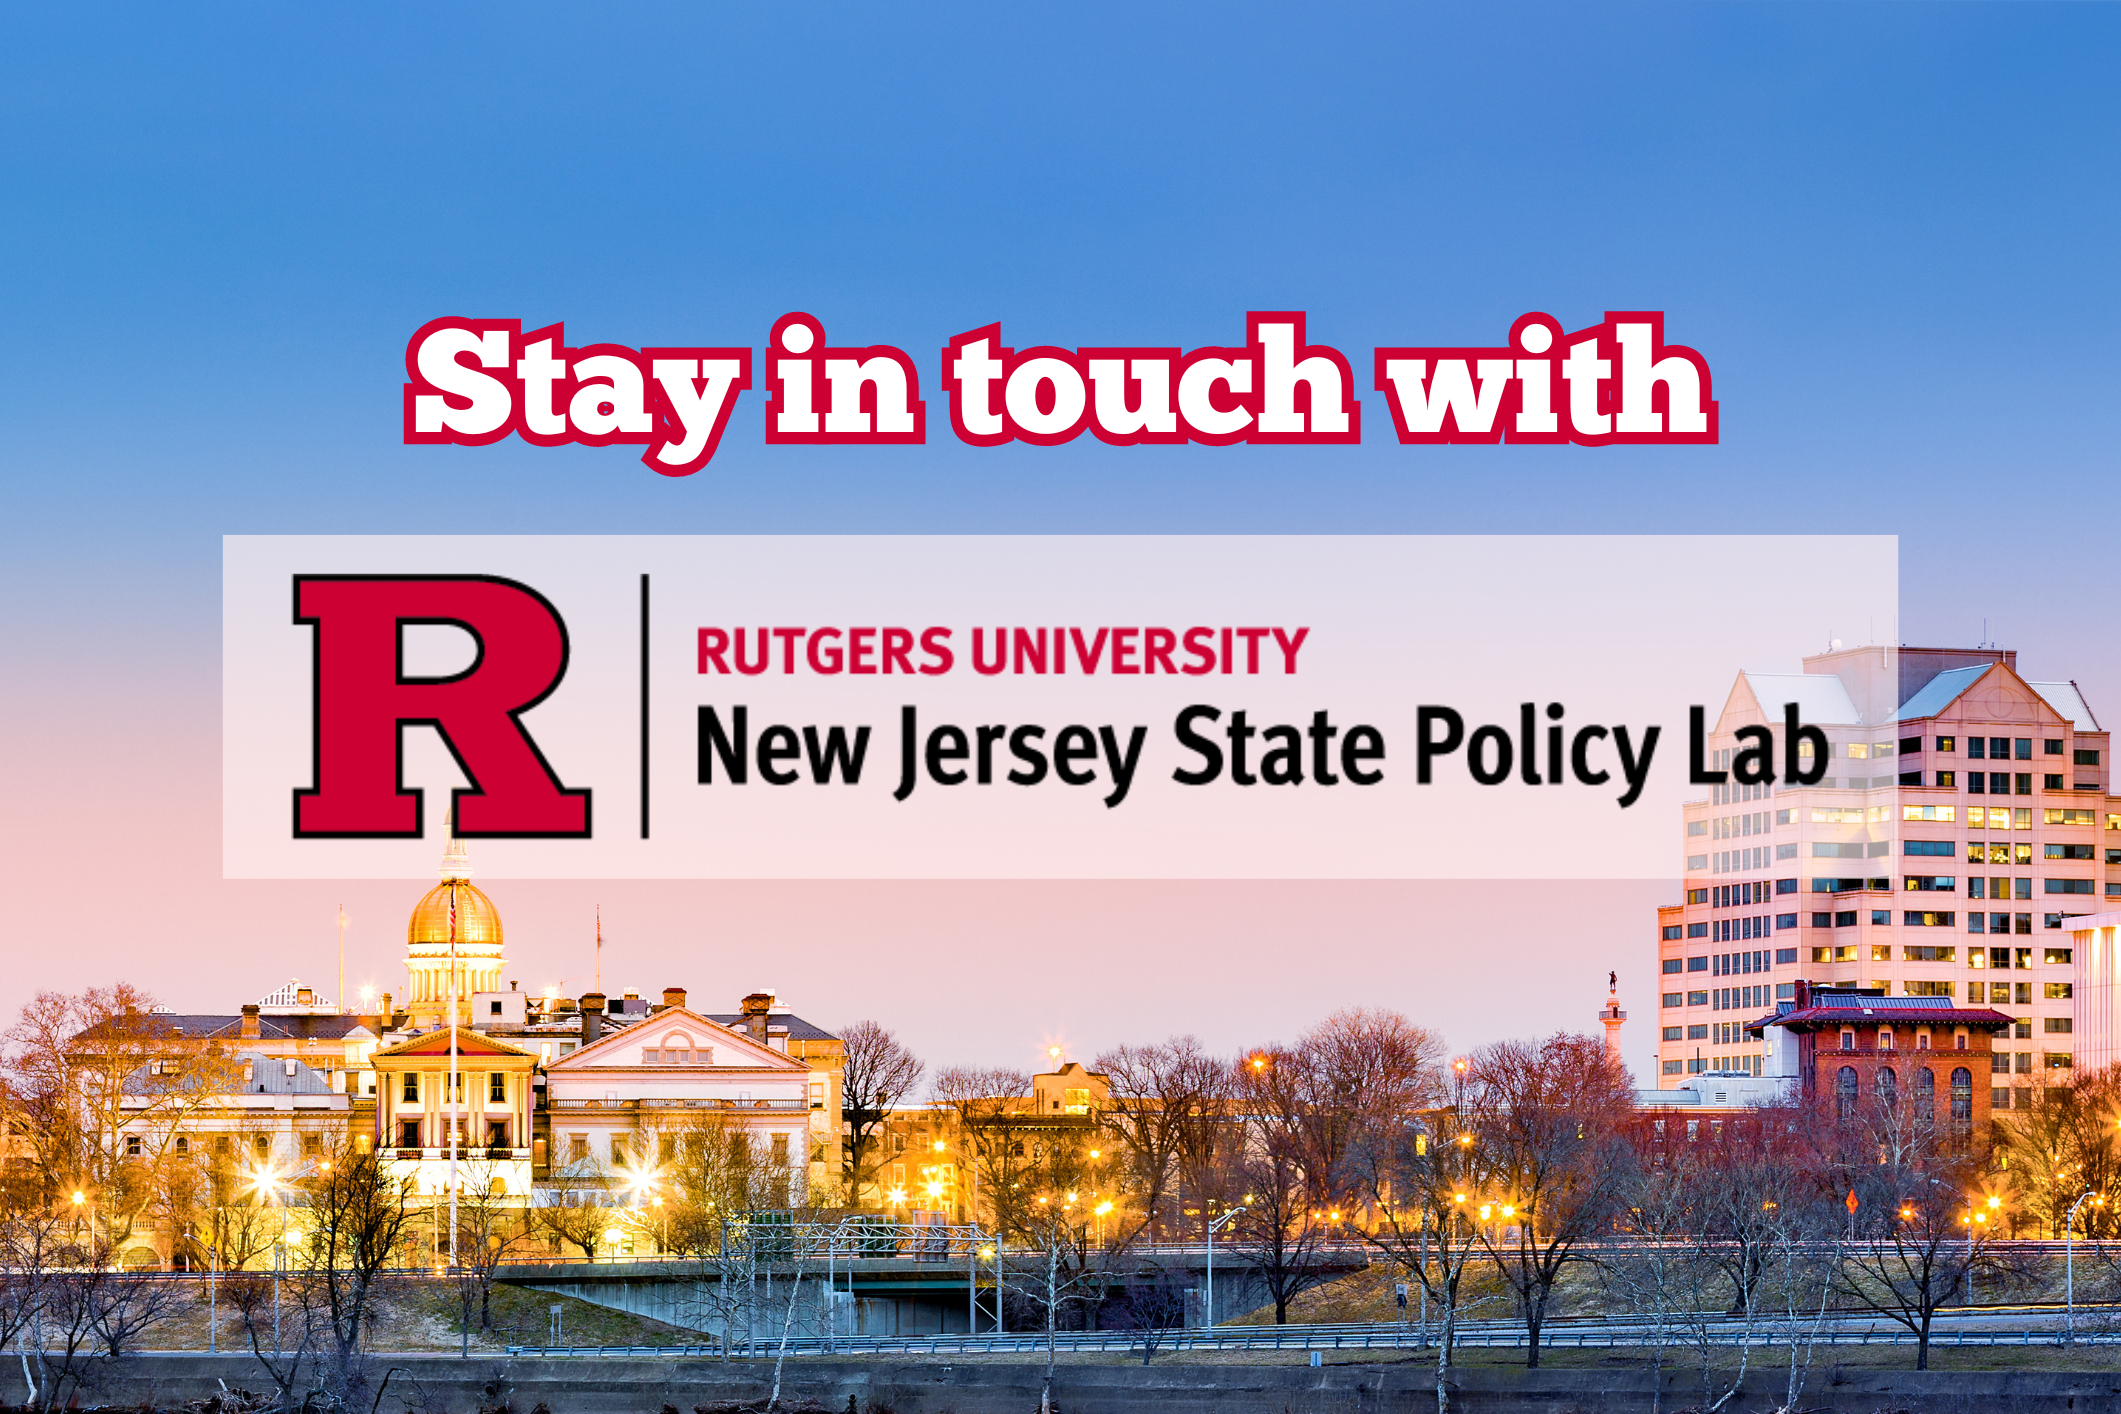 A photo of the Trenton, NJ skyline with the words "Stay in touch with Rutgers University New Jersey State Policy Lab" displayed over the image